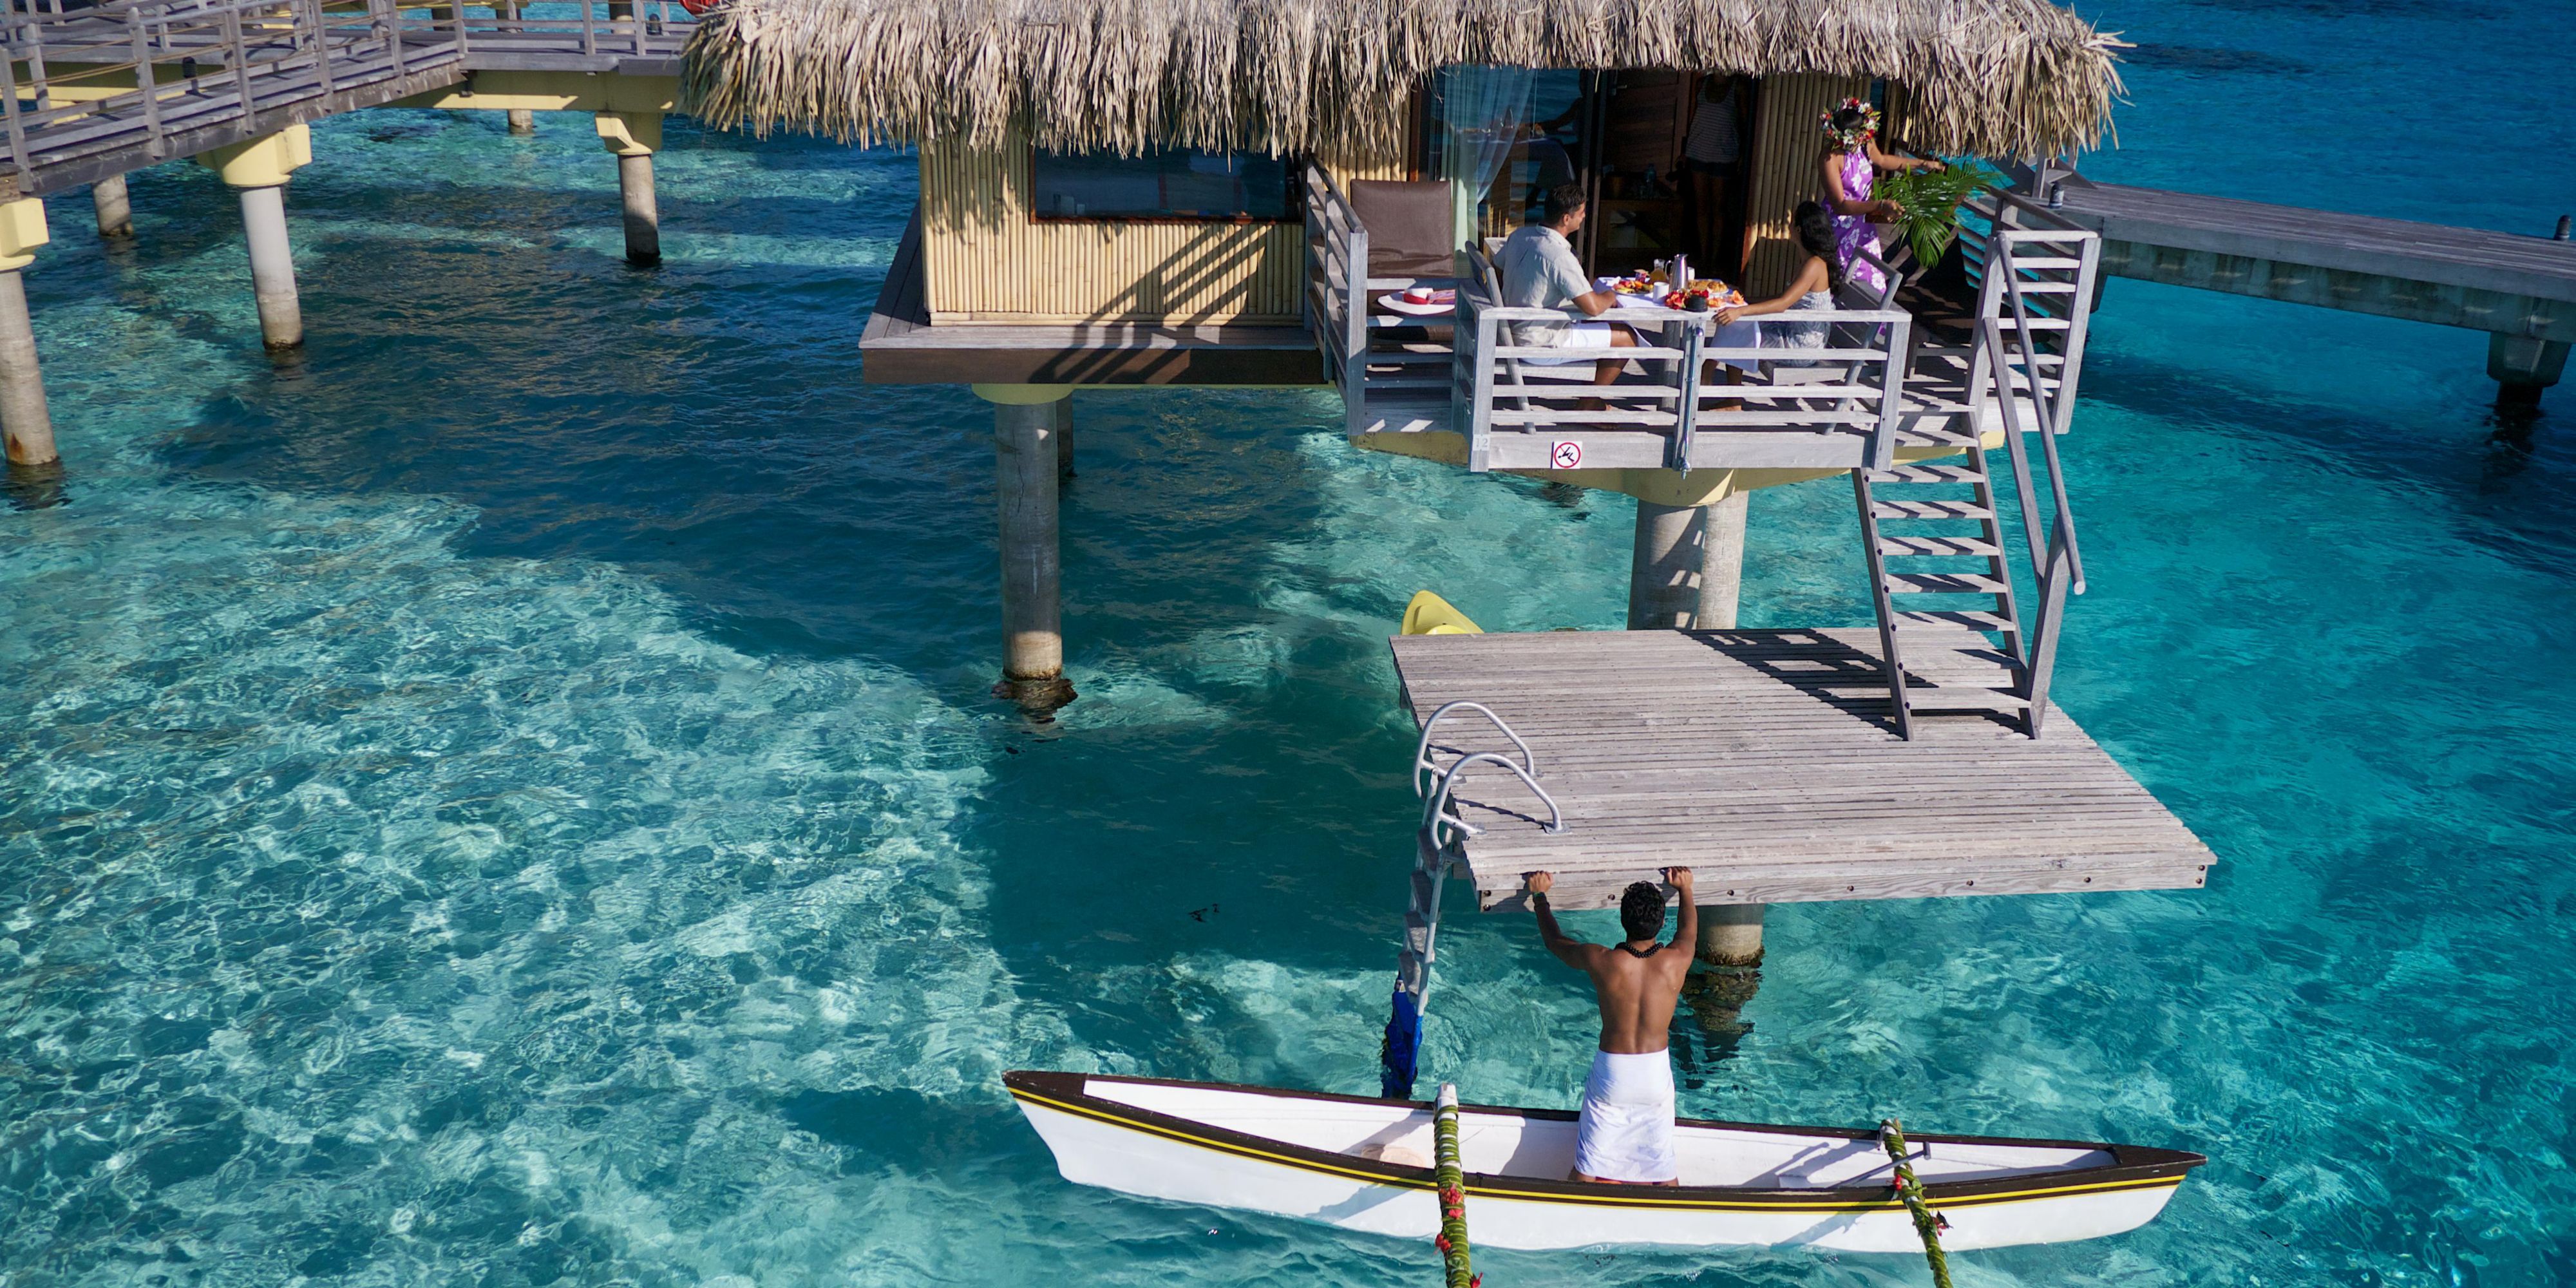 With the sound of the pu (Tahitian for “conch shell"), the dreamiest breakfast in French Polynesia begins Couples can watch their morning meal being delivered across the turquoise lagoon on a traditional outrigger canoe, which pulls right up to their overwater bungalow.